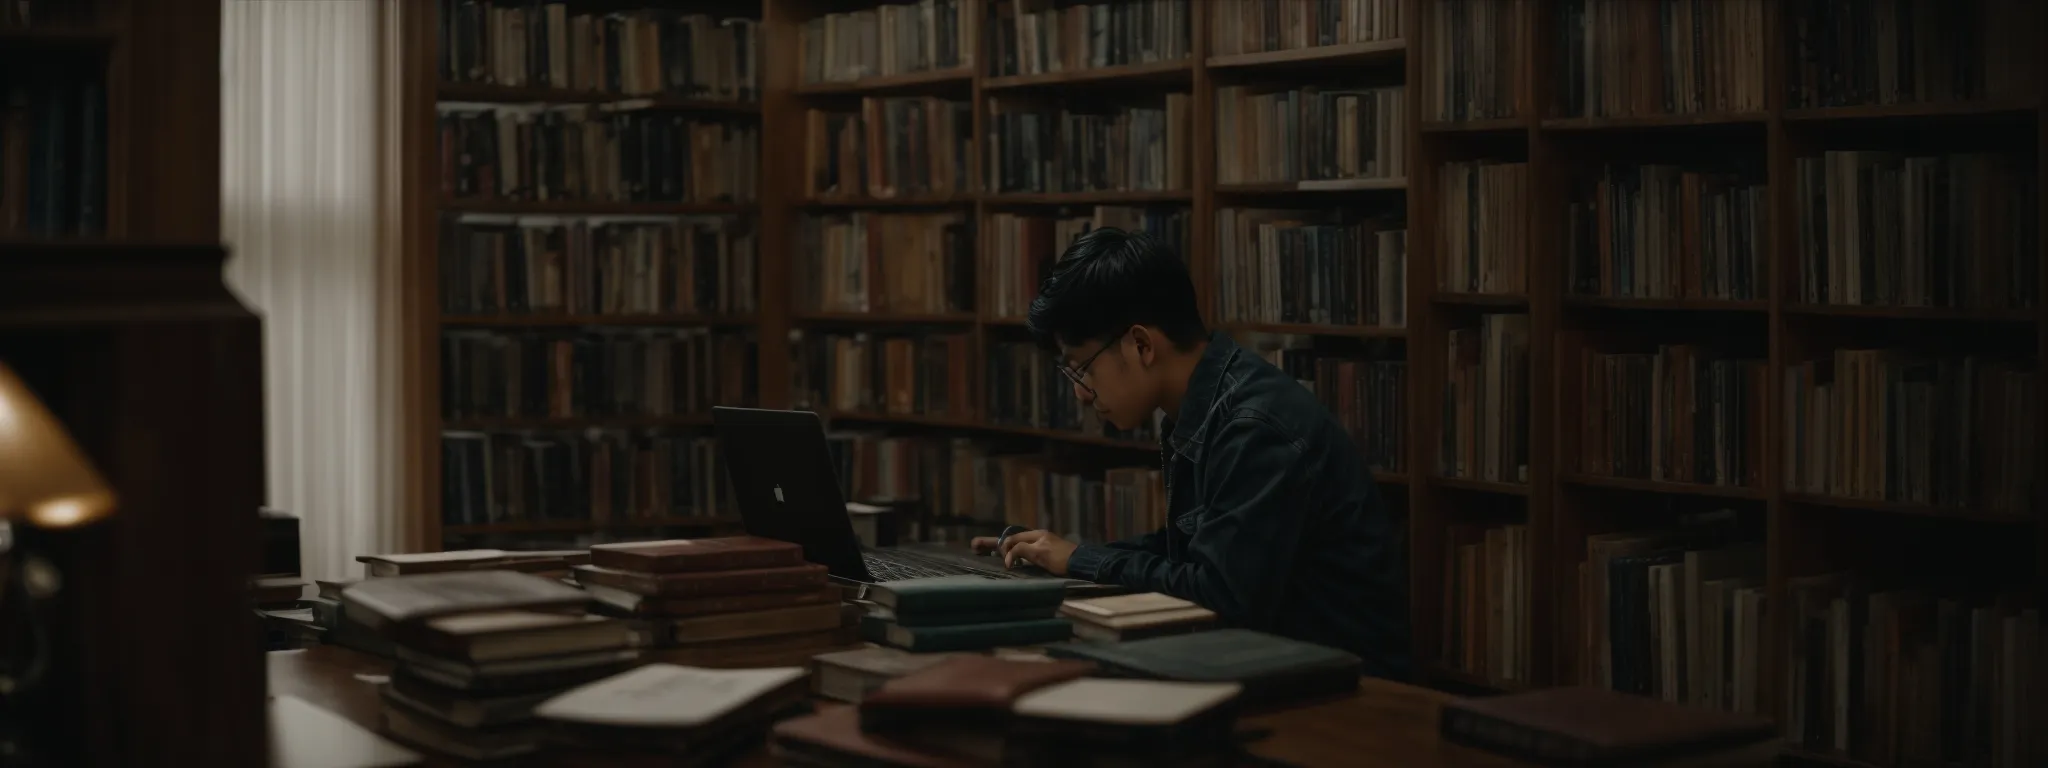 a person typing on a laptop in a library full of books.